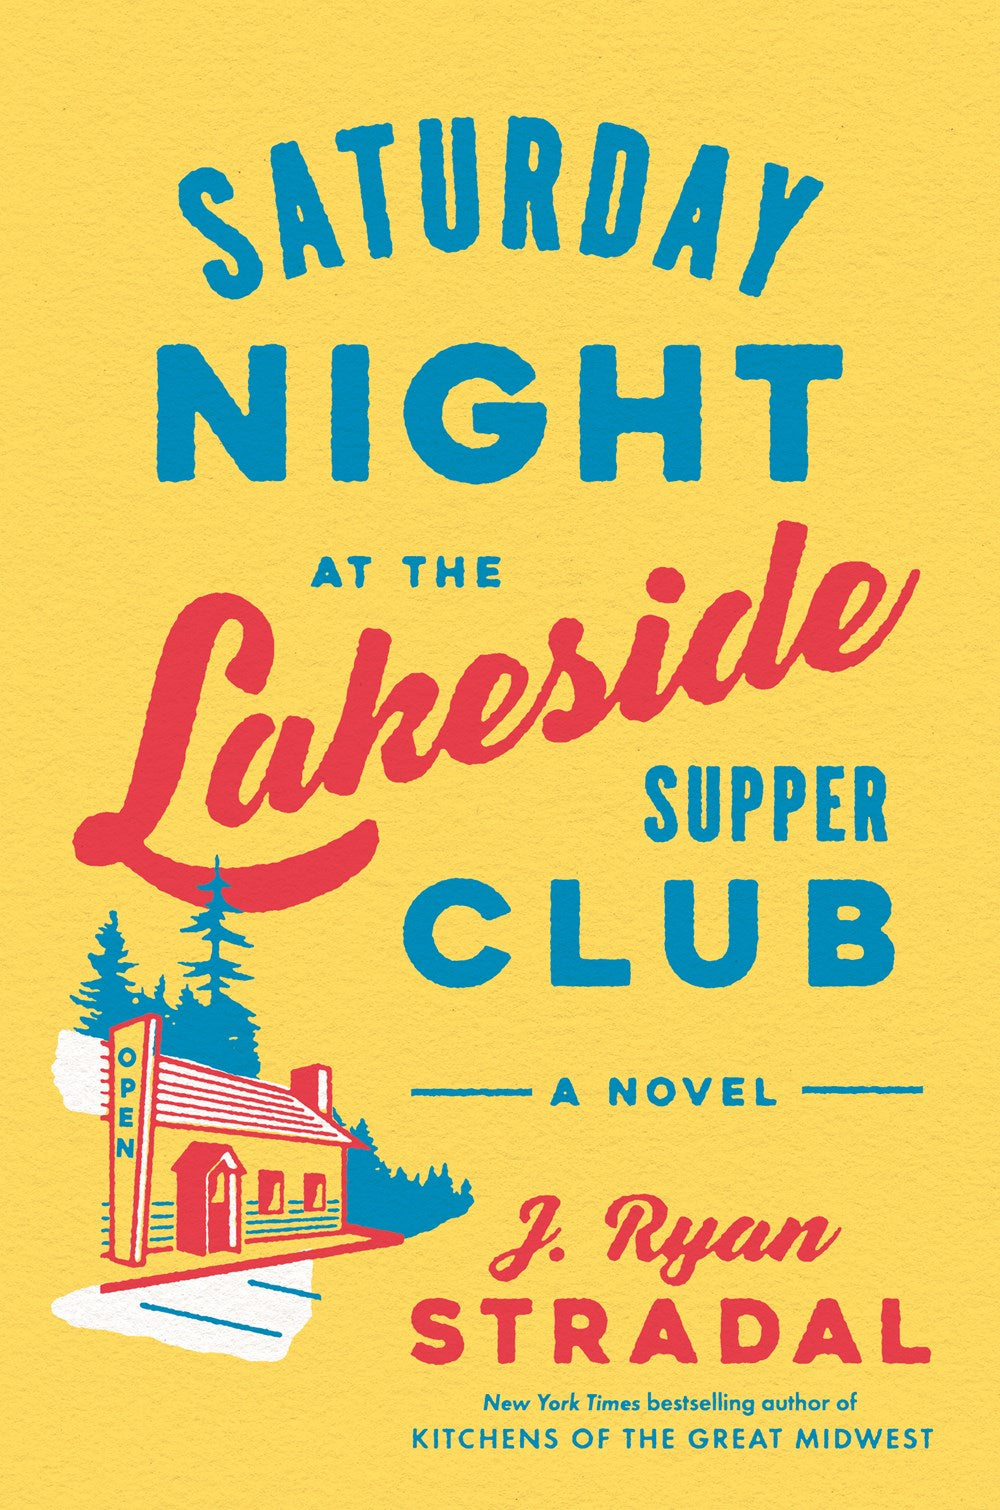 Saturday Night at the Lakeside Supper Club : A Novel